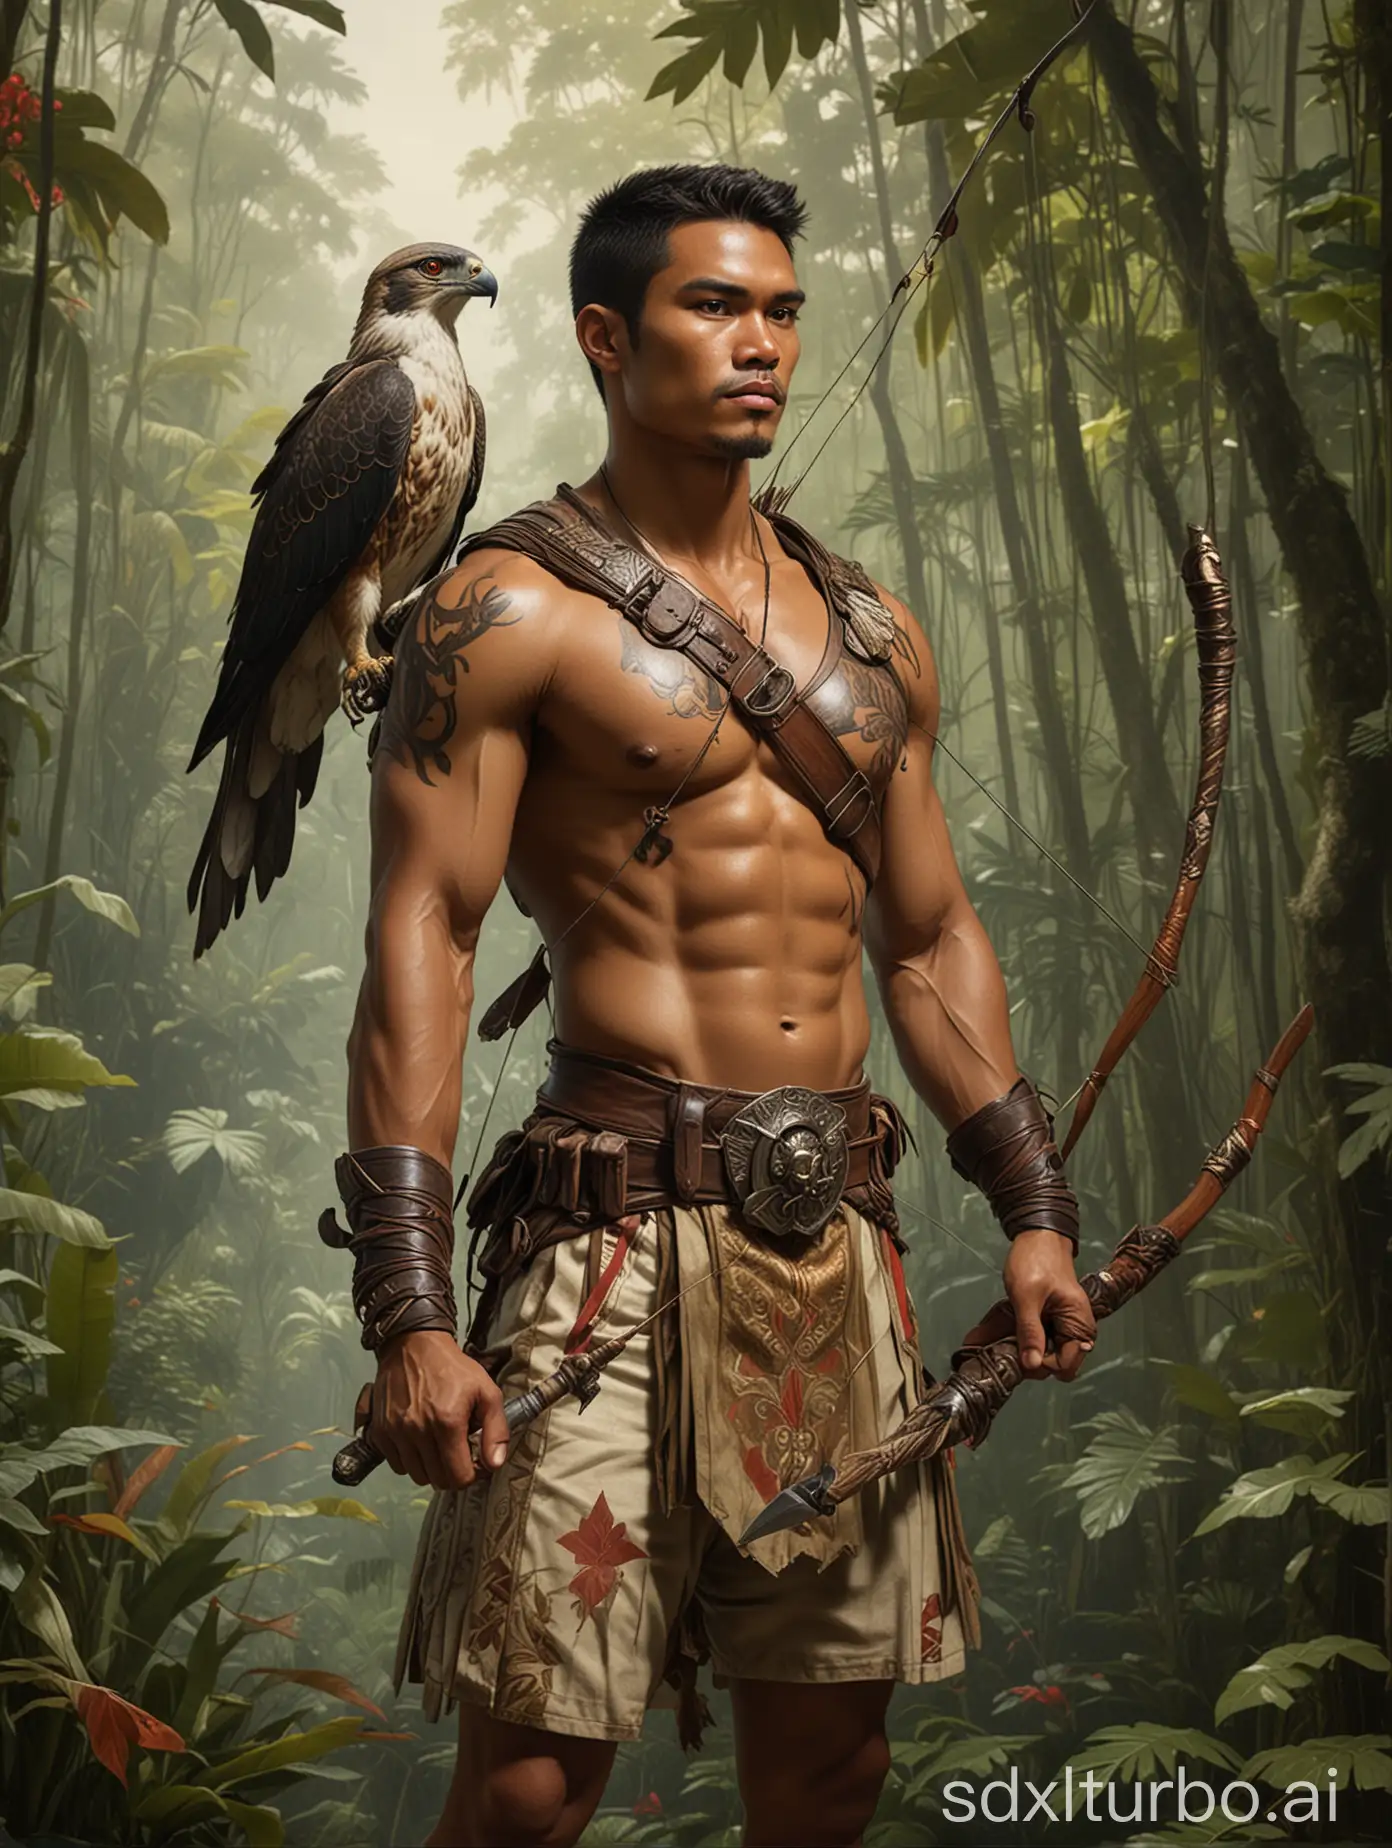 A full-body shot of a handsome, tall, and muscular Philipino-Java descent, with rough-looking guy in a sensual traditional archer costume. With a falcon pet. With a background of an Indonesian rainforest in the style of painting by Leyendecker.